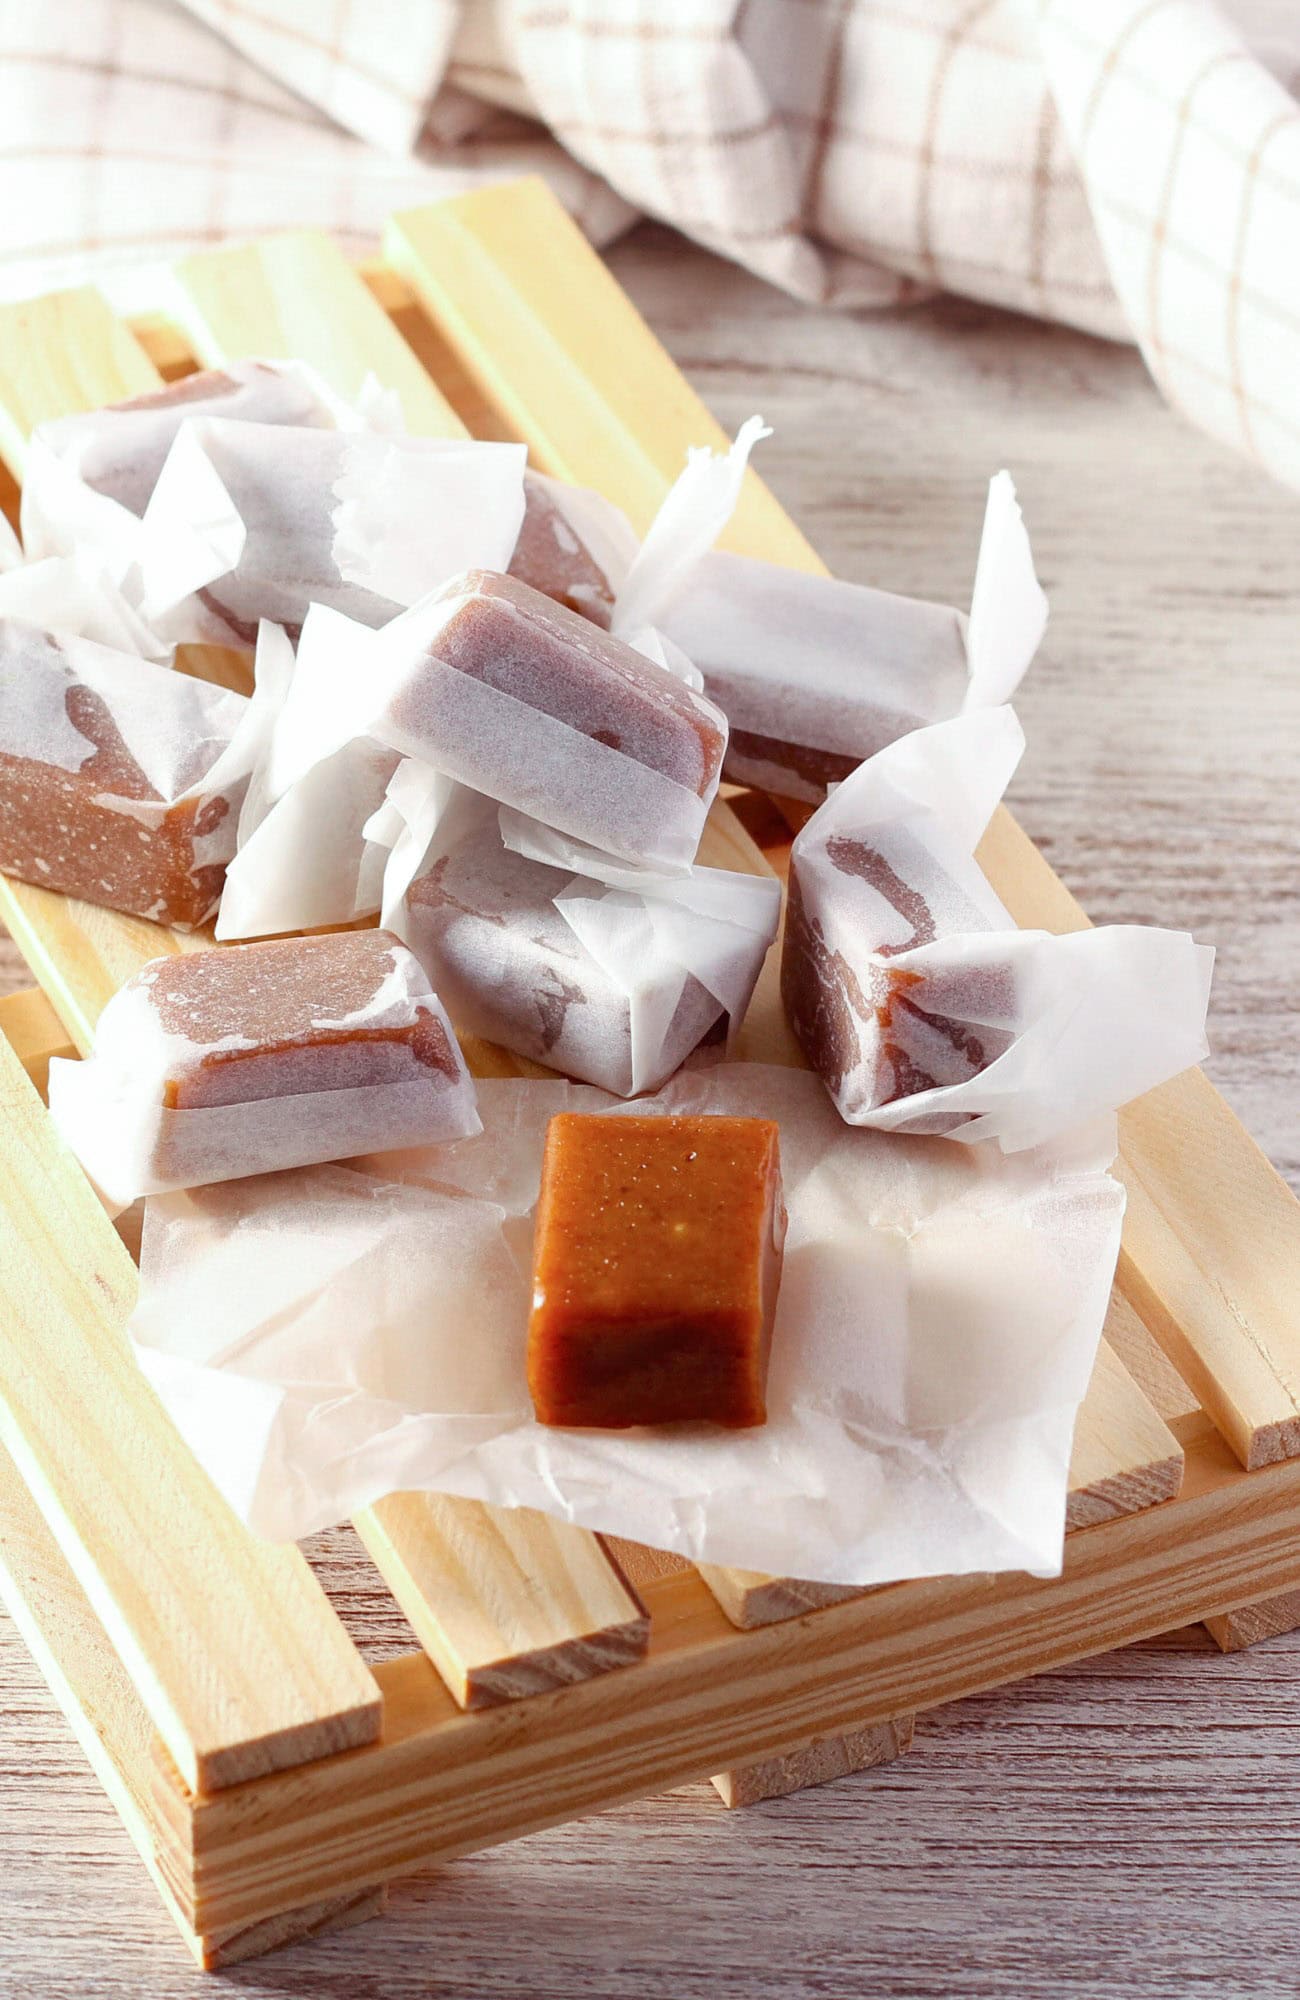 Homemade buttery dark brown sugar caramels wrapped in white paper, presented on a wooden tray with a checkered cloth in the background, on a wooden surface. 